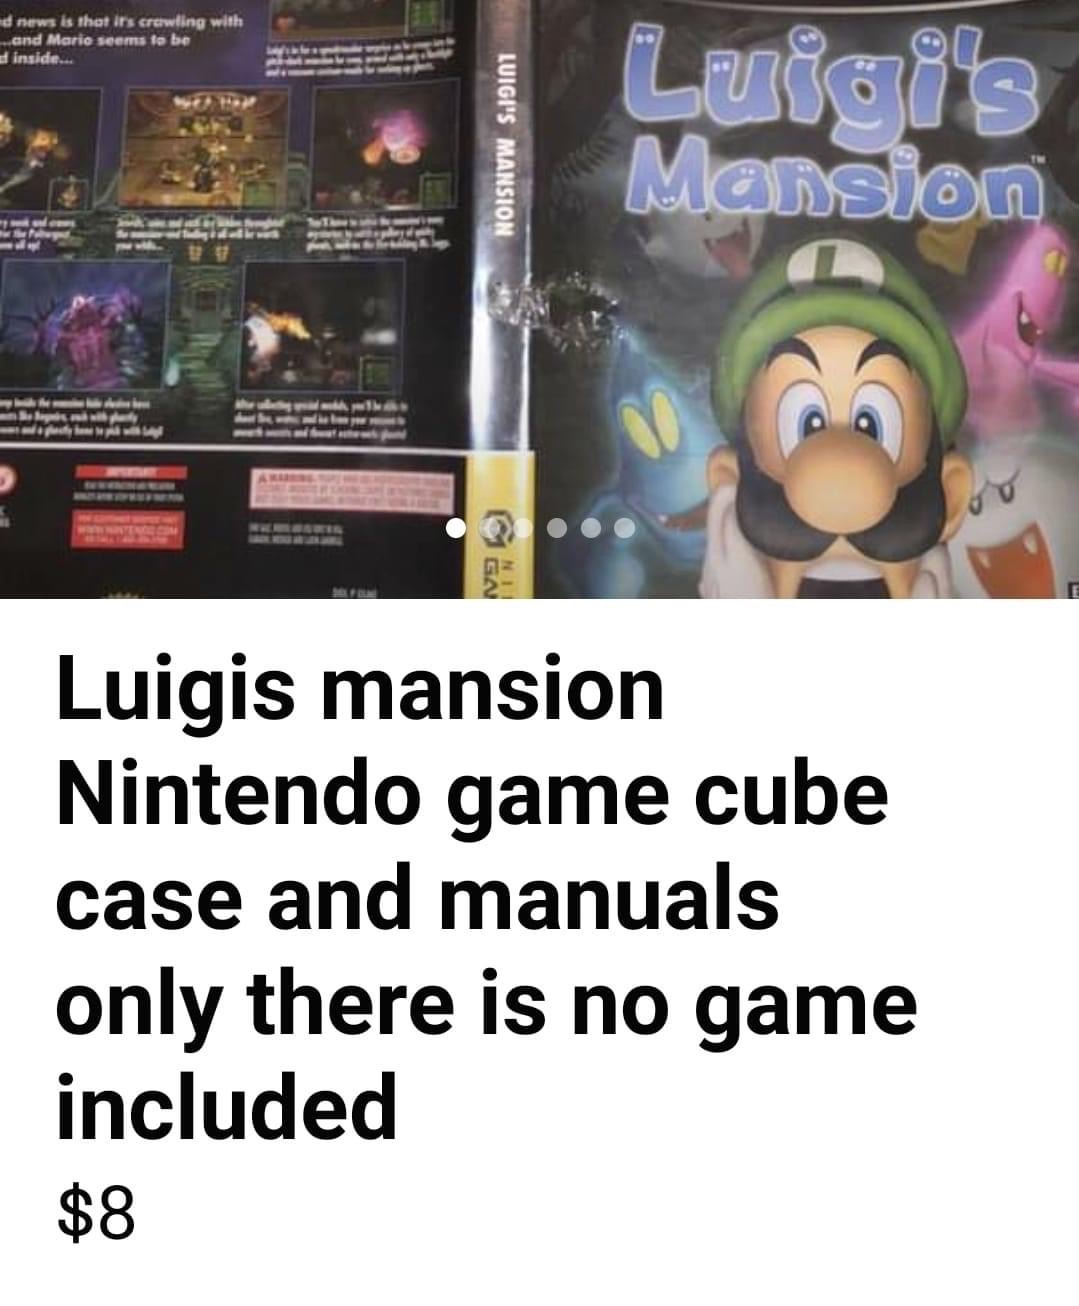 facebook marketplace - is this item still available memes - luigi's mansion - d news is that it's crawling with and Marie seems to be inside... Luigi's Mansion Ga Luigis mansion Nintendo game cube case and manuals only there is no game included $8